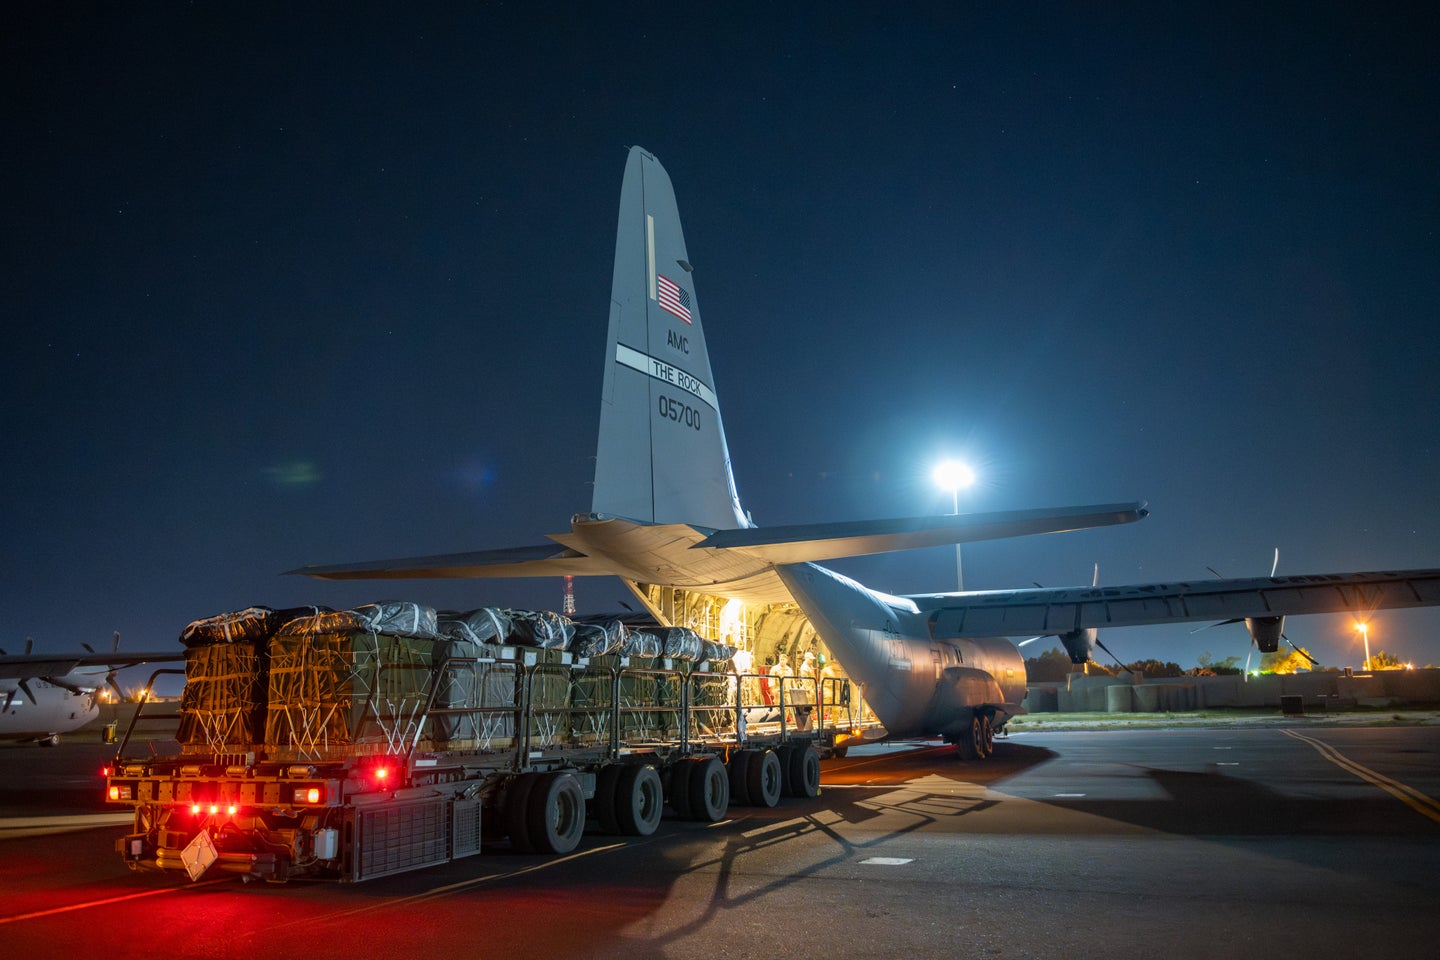 An American C-130 cargo plane being loaded with supplies for Gaza. (Photo courtesy U.S. Air Force)